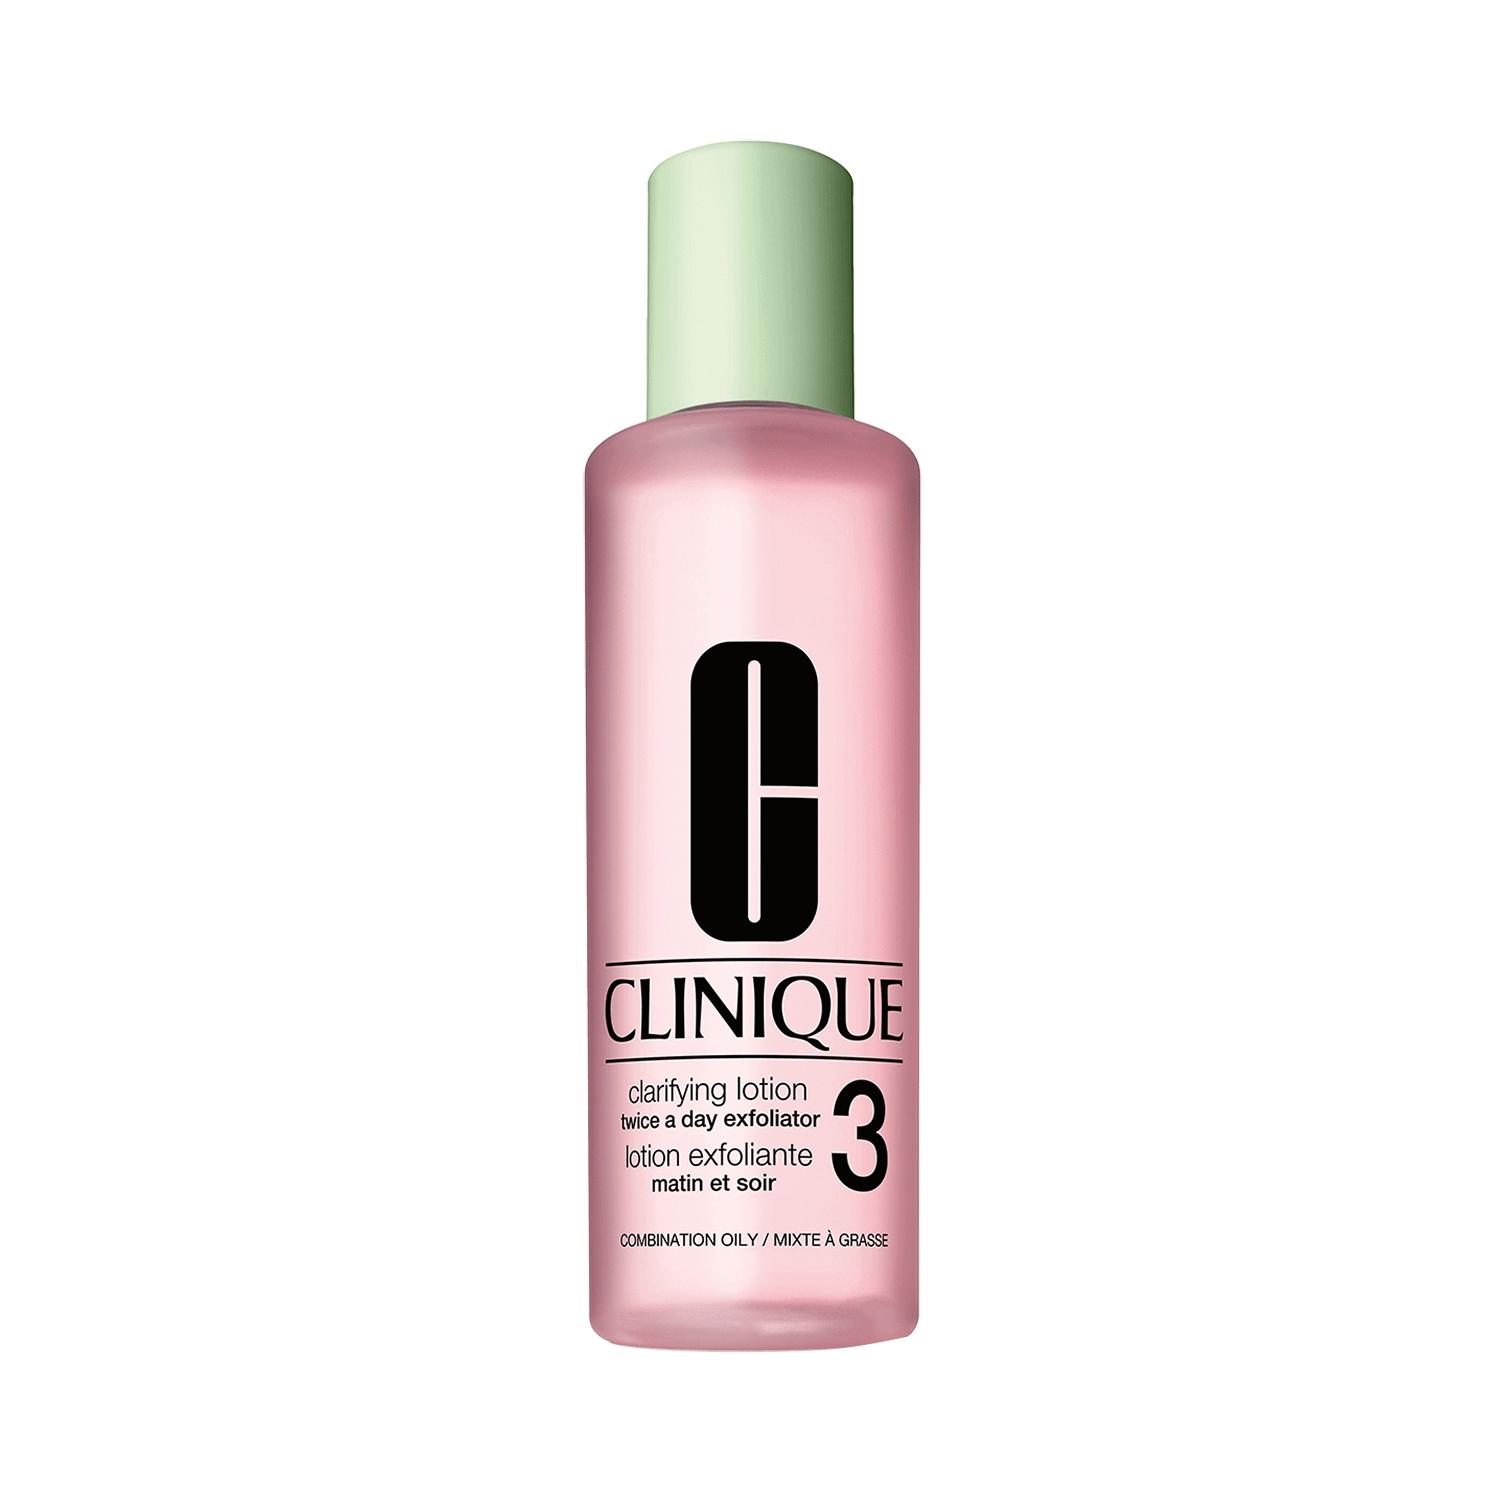 clinique clarifying lotion twice a day exfoliator 3 (60ml)